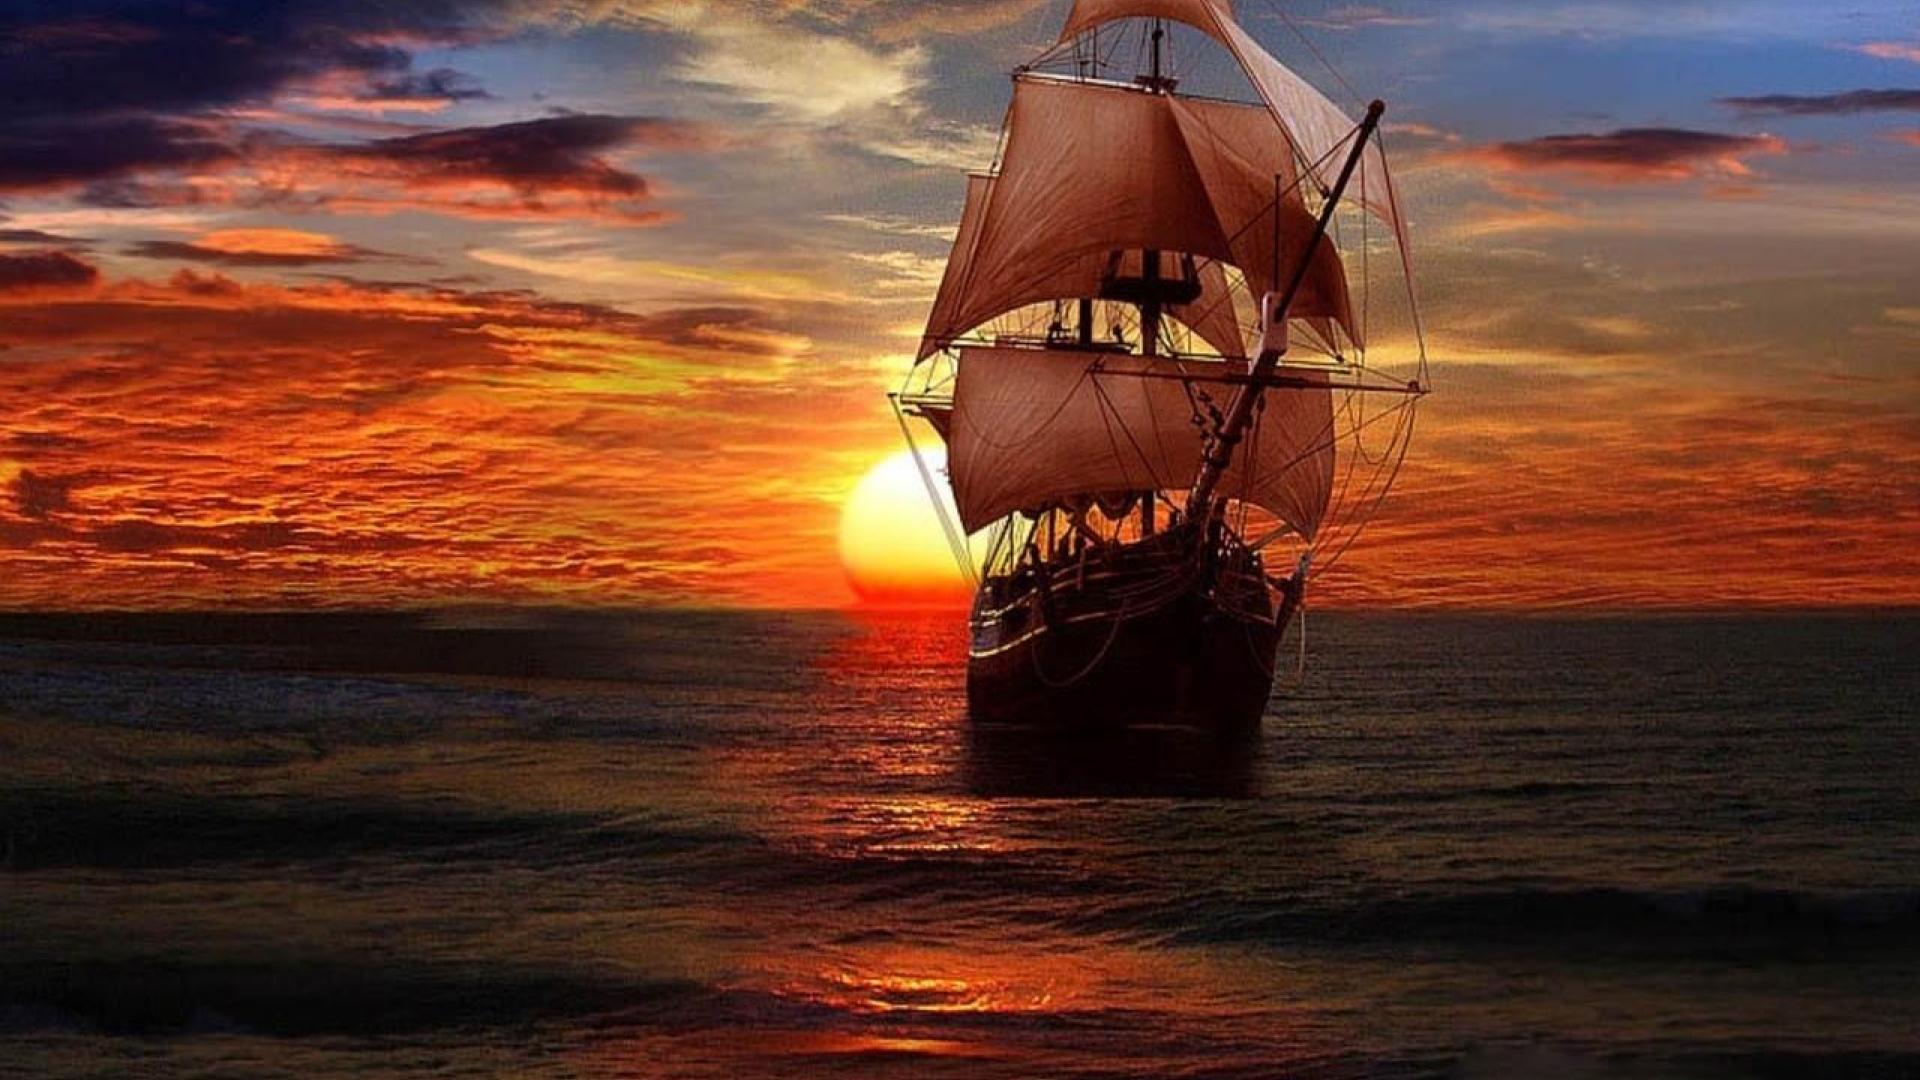 pirates ship on the ocean 1240935 wallpaper - (#87987) - HQ ...